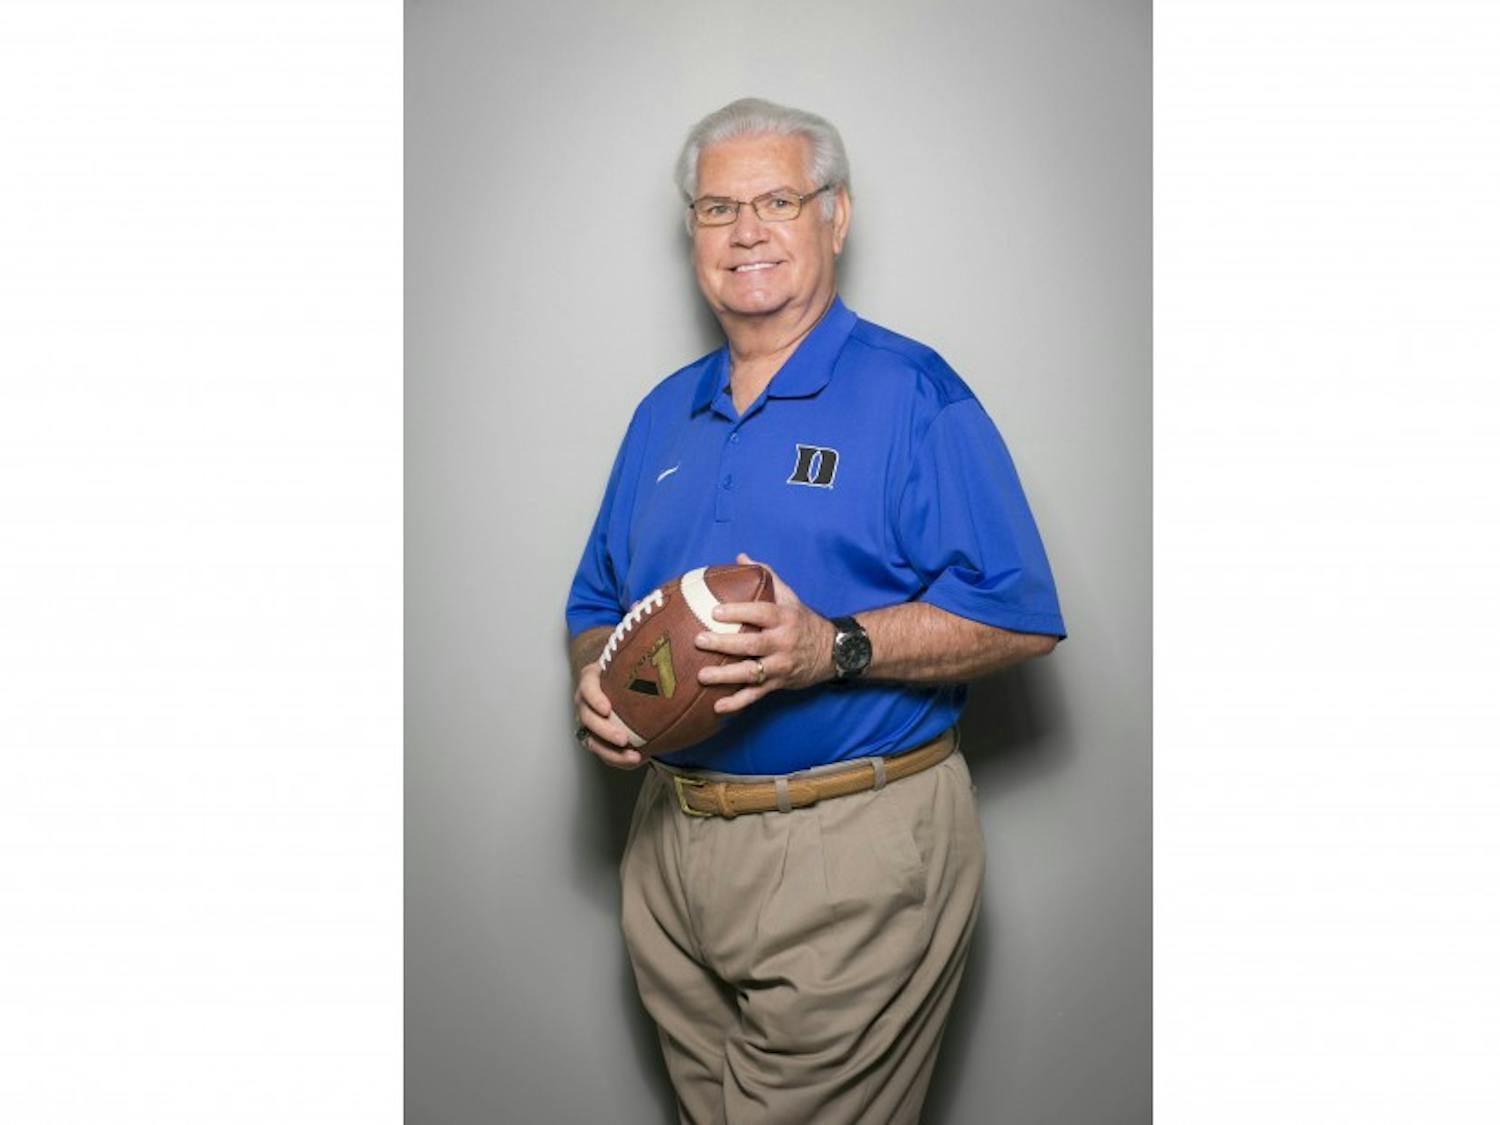 Voice of the Blue Devils, Bob Harris, poses in the studio for a portrait.  Image will be used to highlight his years of service in the final year of doing "play by play" for both the football and basketball programs.